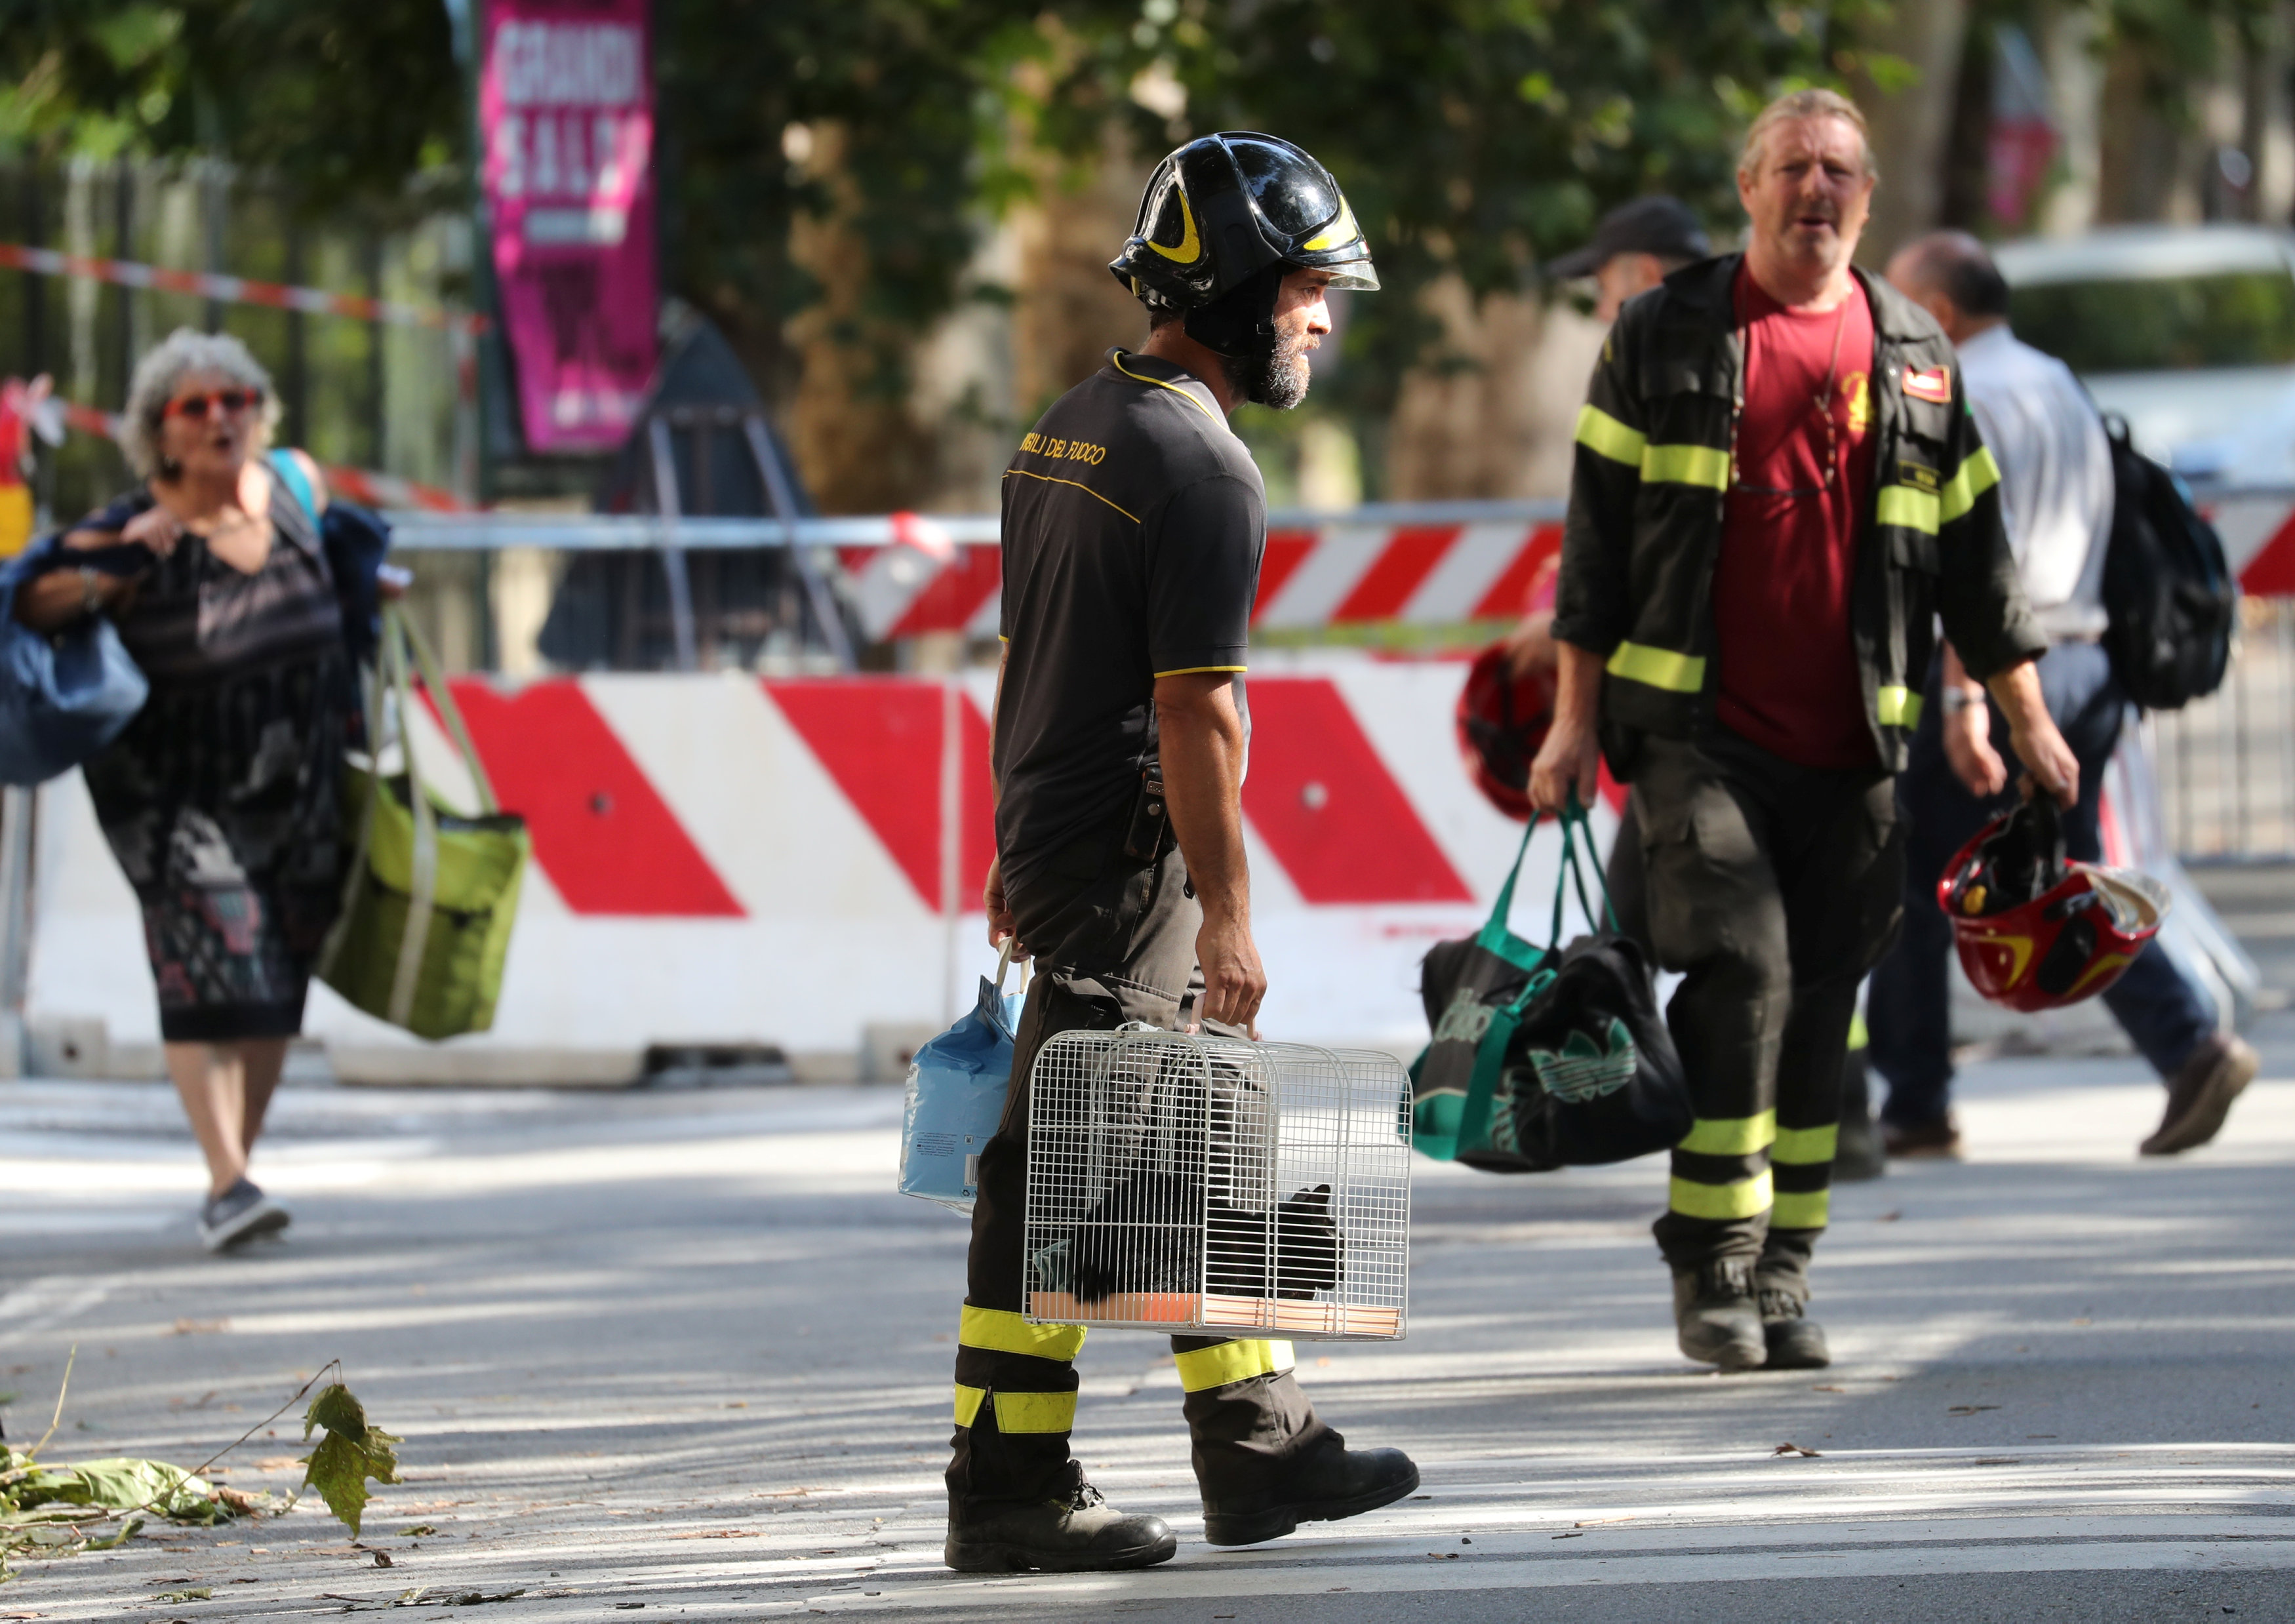 A firefighter carries a cat recovered from the houses near the collapsed Morandi Bridge, in the port city of Genoa, Italy August 16, 2018. REUTERS/Stefano Rellandini